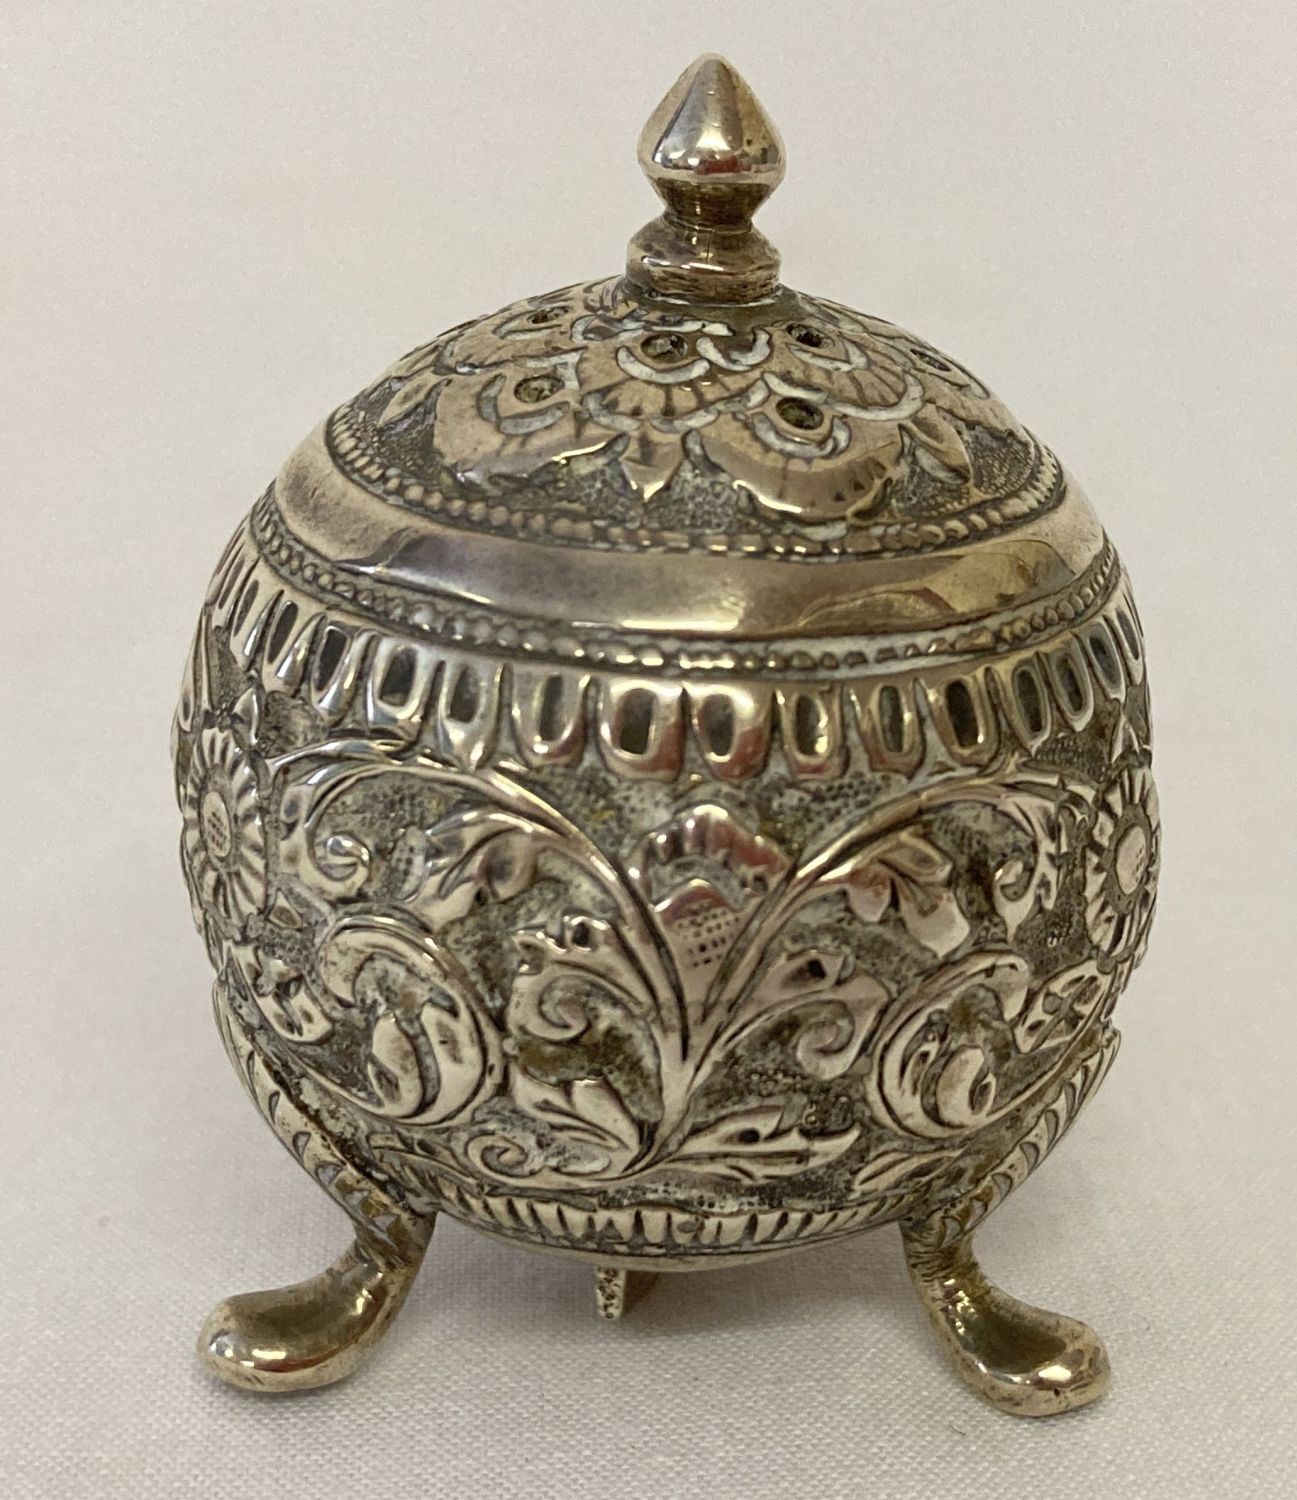 A Persian silver 3 footed pepperette of spherical form, with ornate floral decoration throughout.